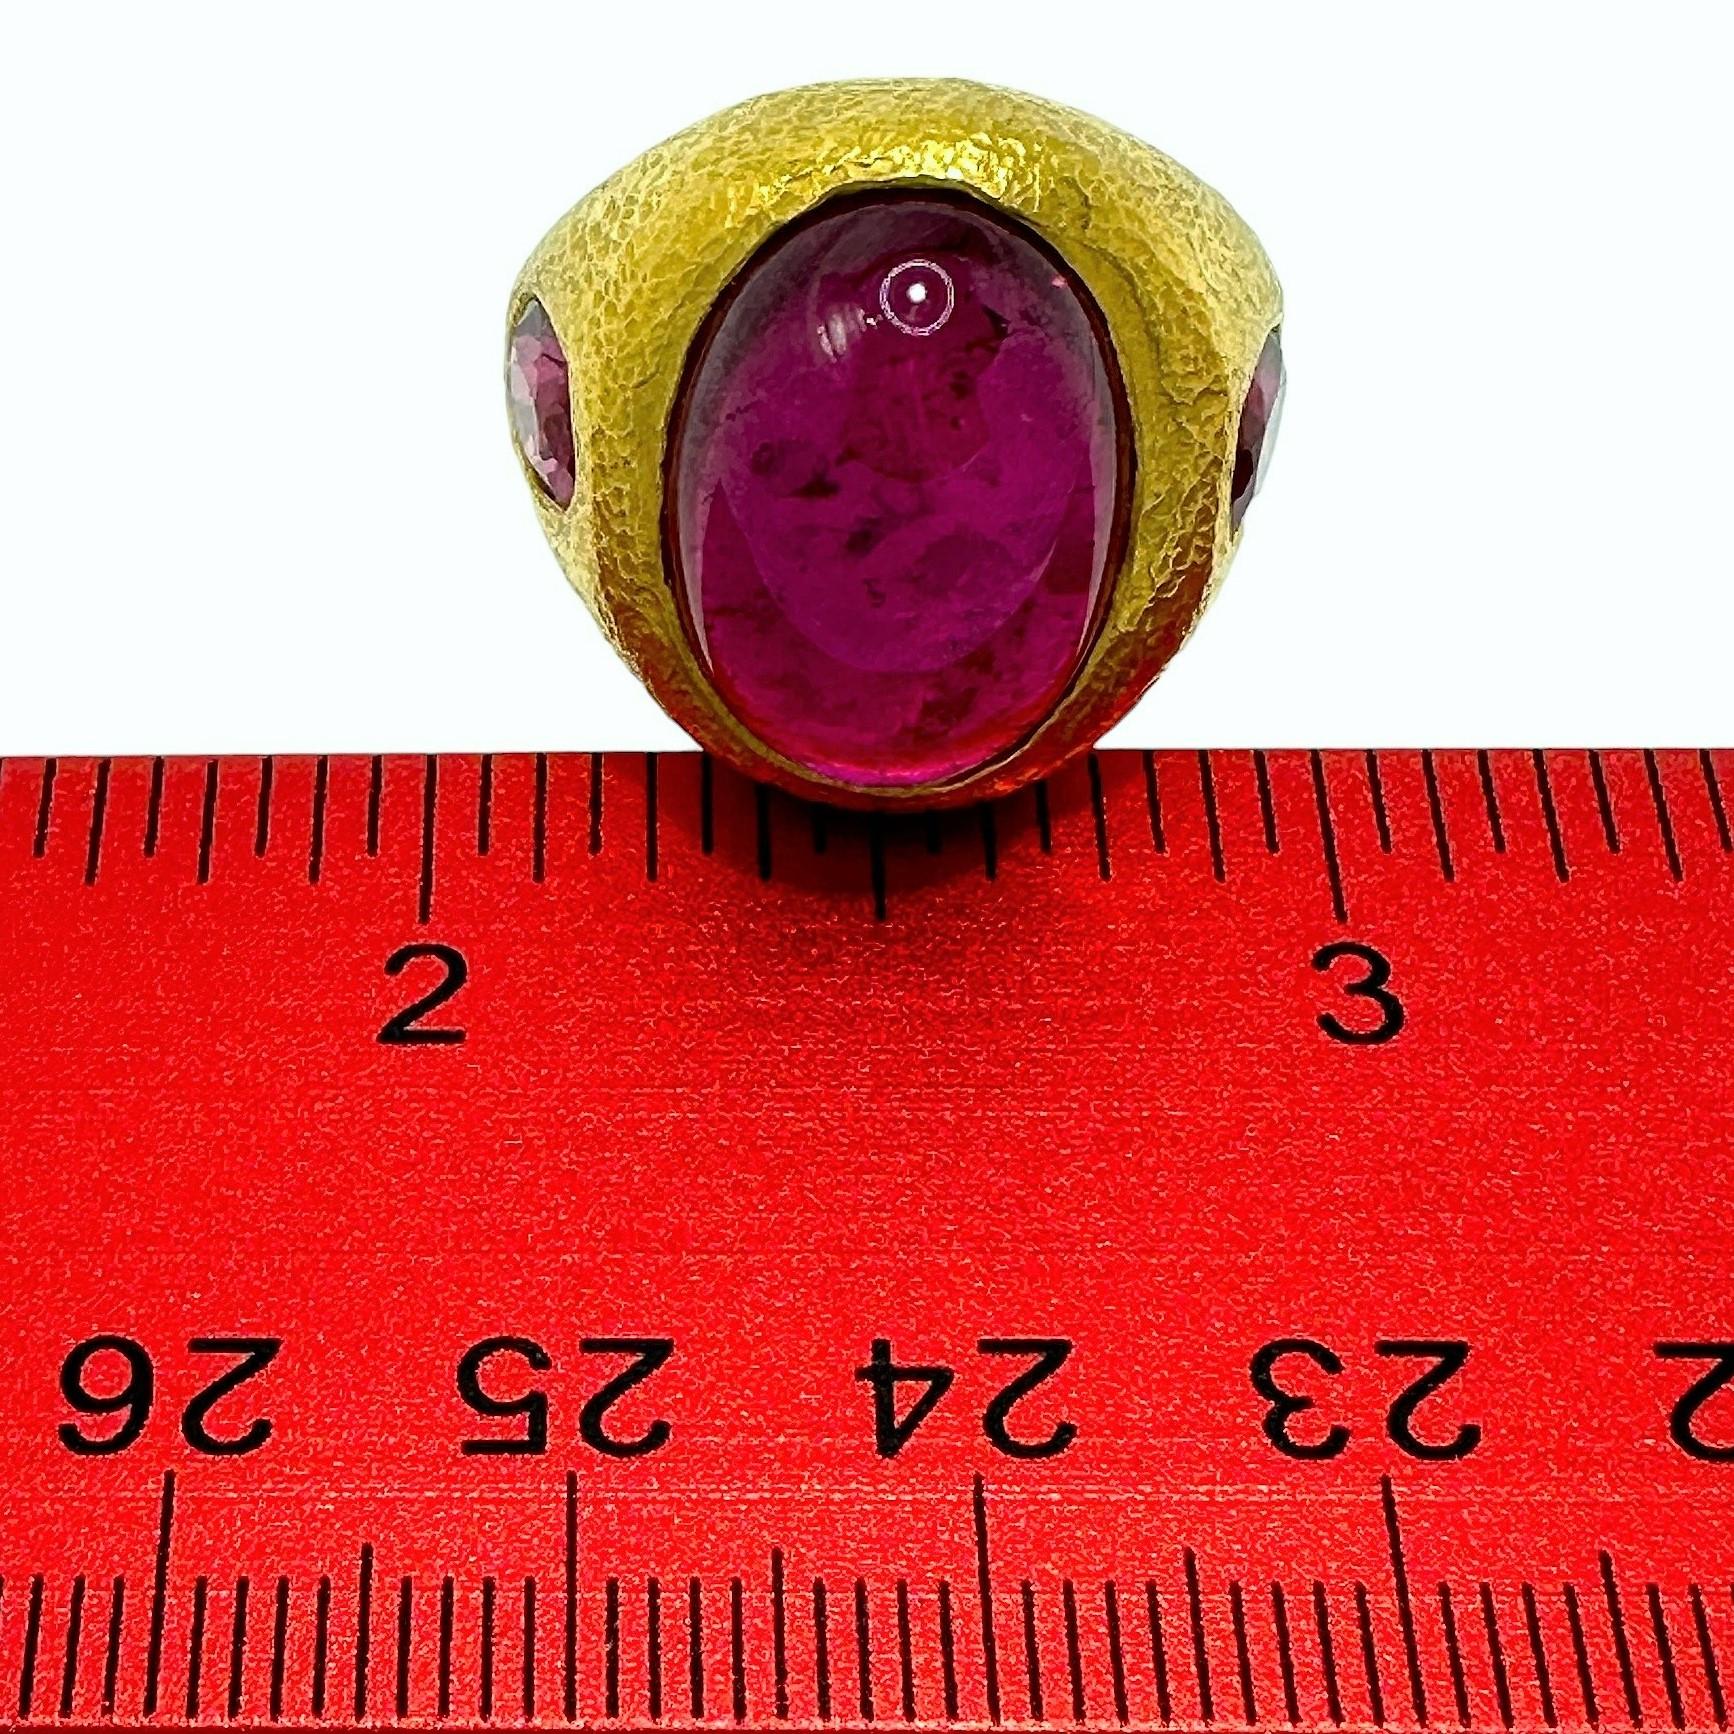 Vintage 24k Gold Hammered Finish Ring with Rubellite Tourmalines by Pisani 3